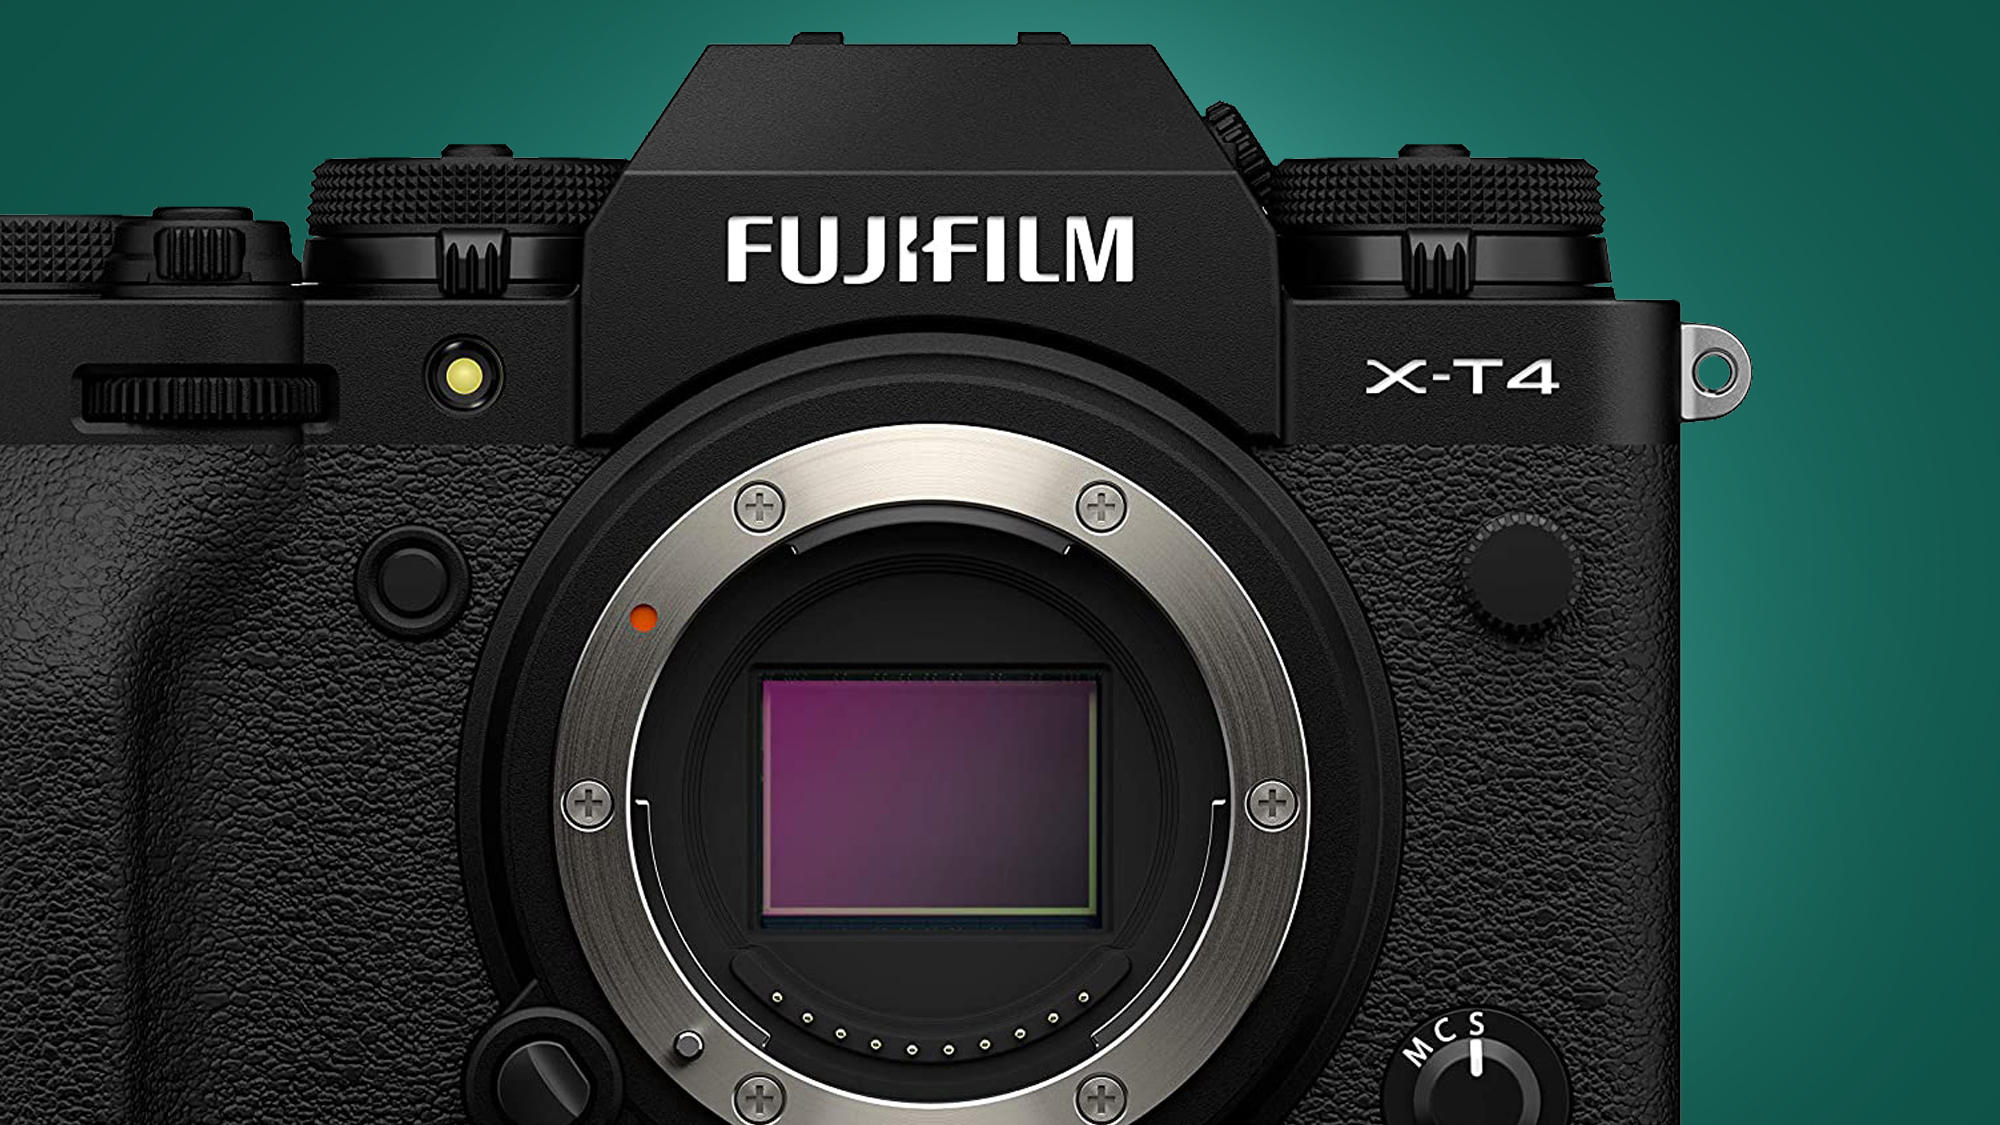 The Fujifilm X-T4 on a green background